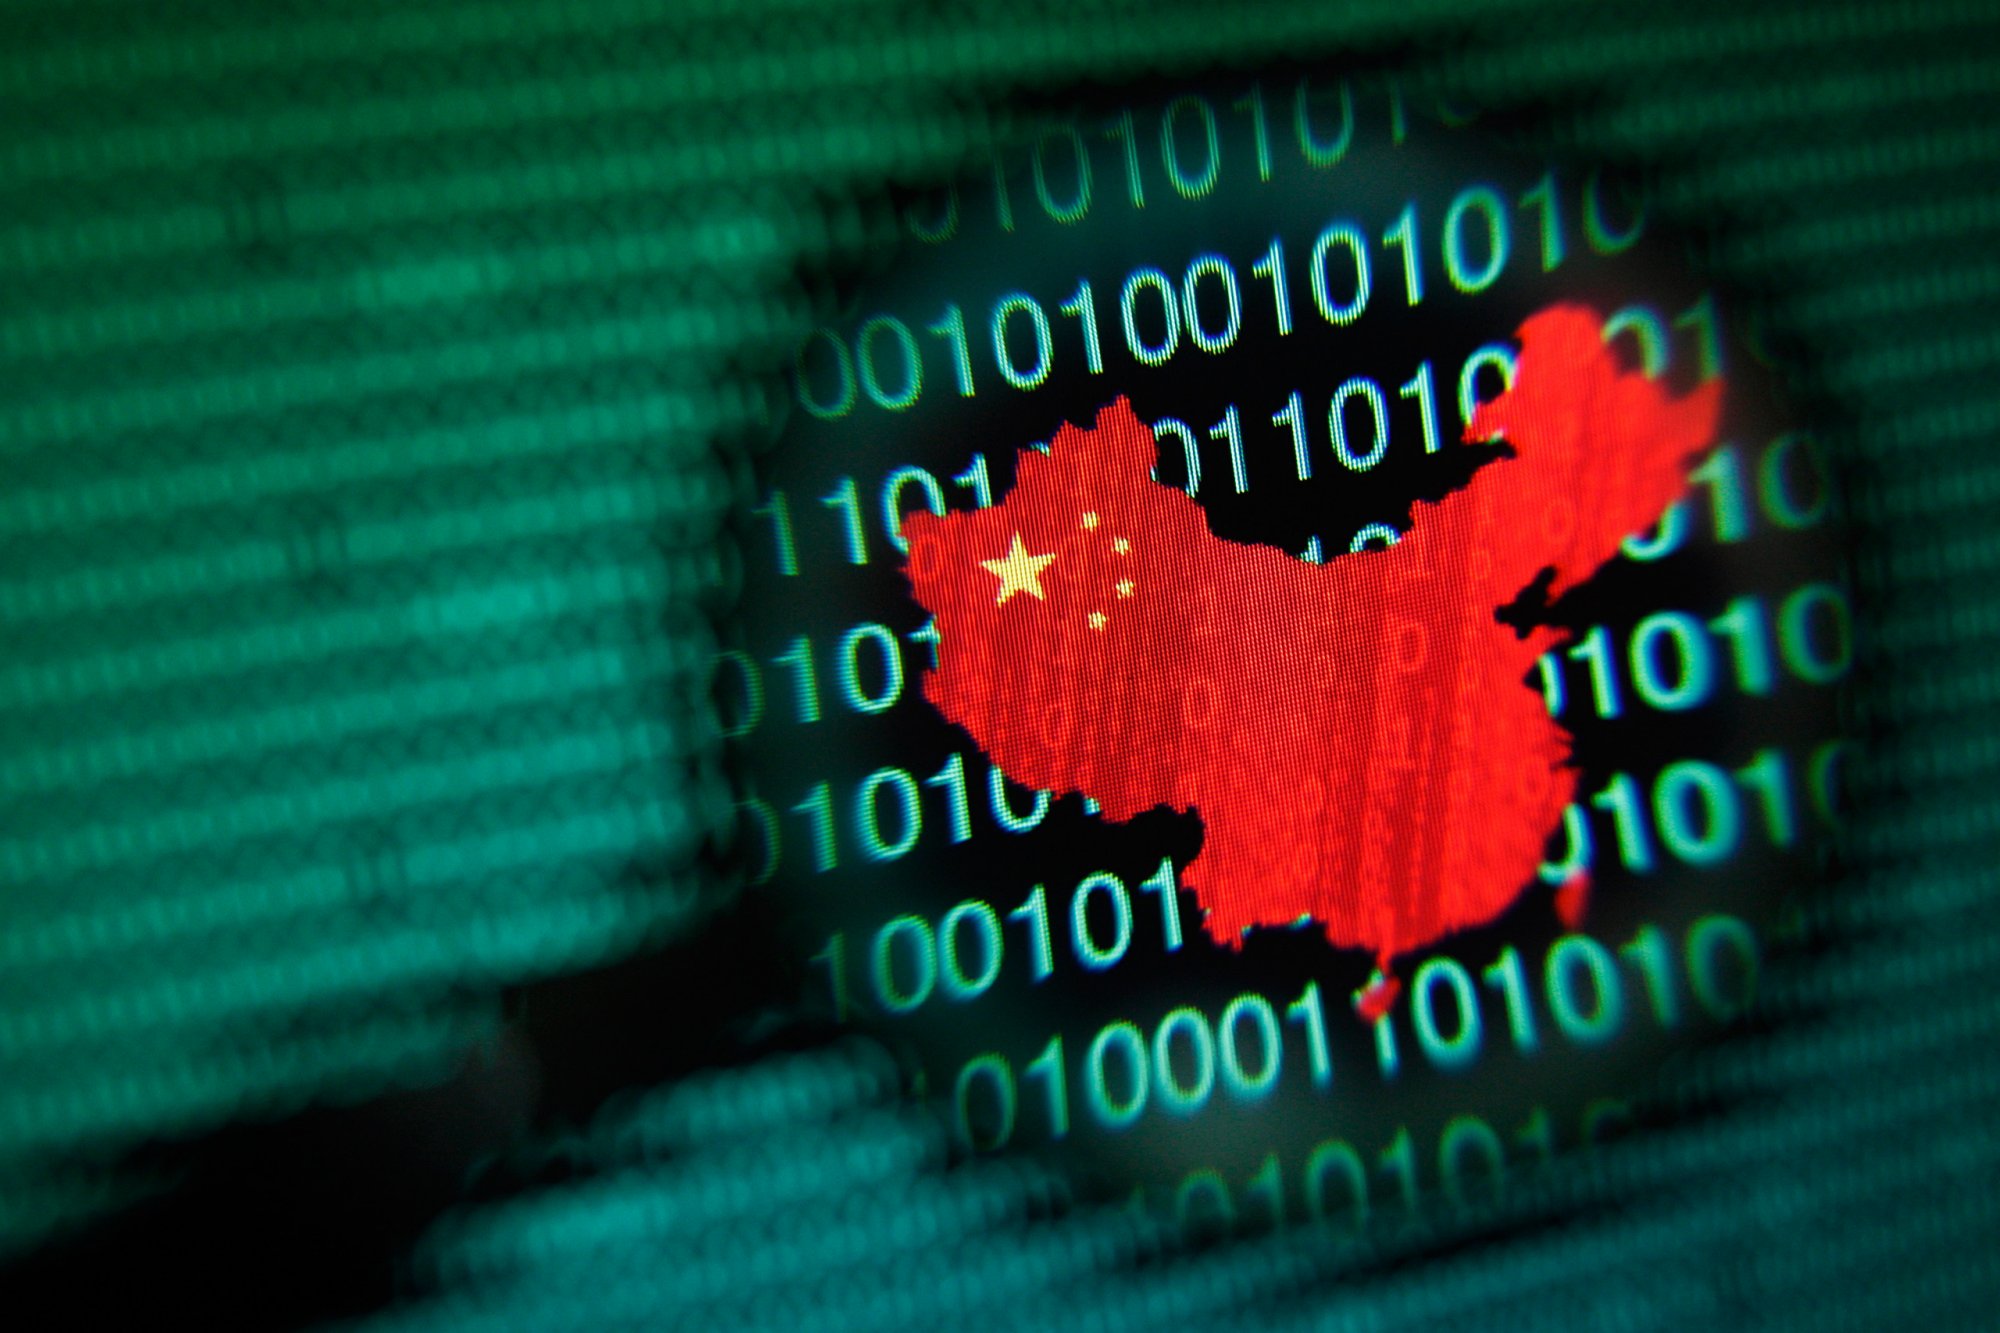 Image: Leaked documents reveal China’s use of paid online trolls to shift public opinion